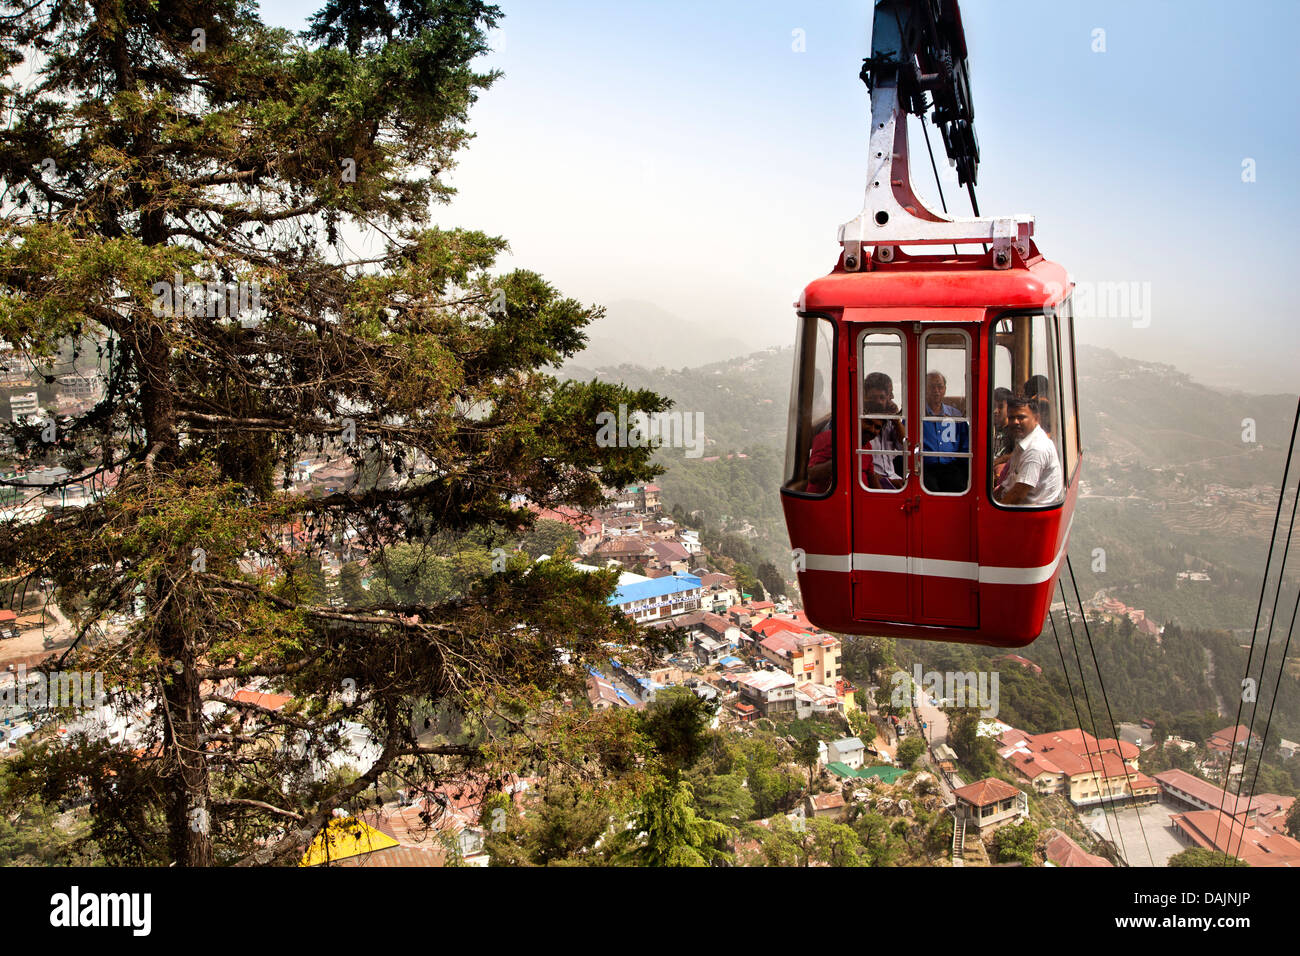 Overhead Cable car in motion, Gun Hill, Mussoorie, Uttarakhand, India Stock Photo